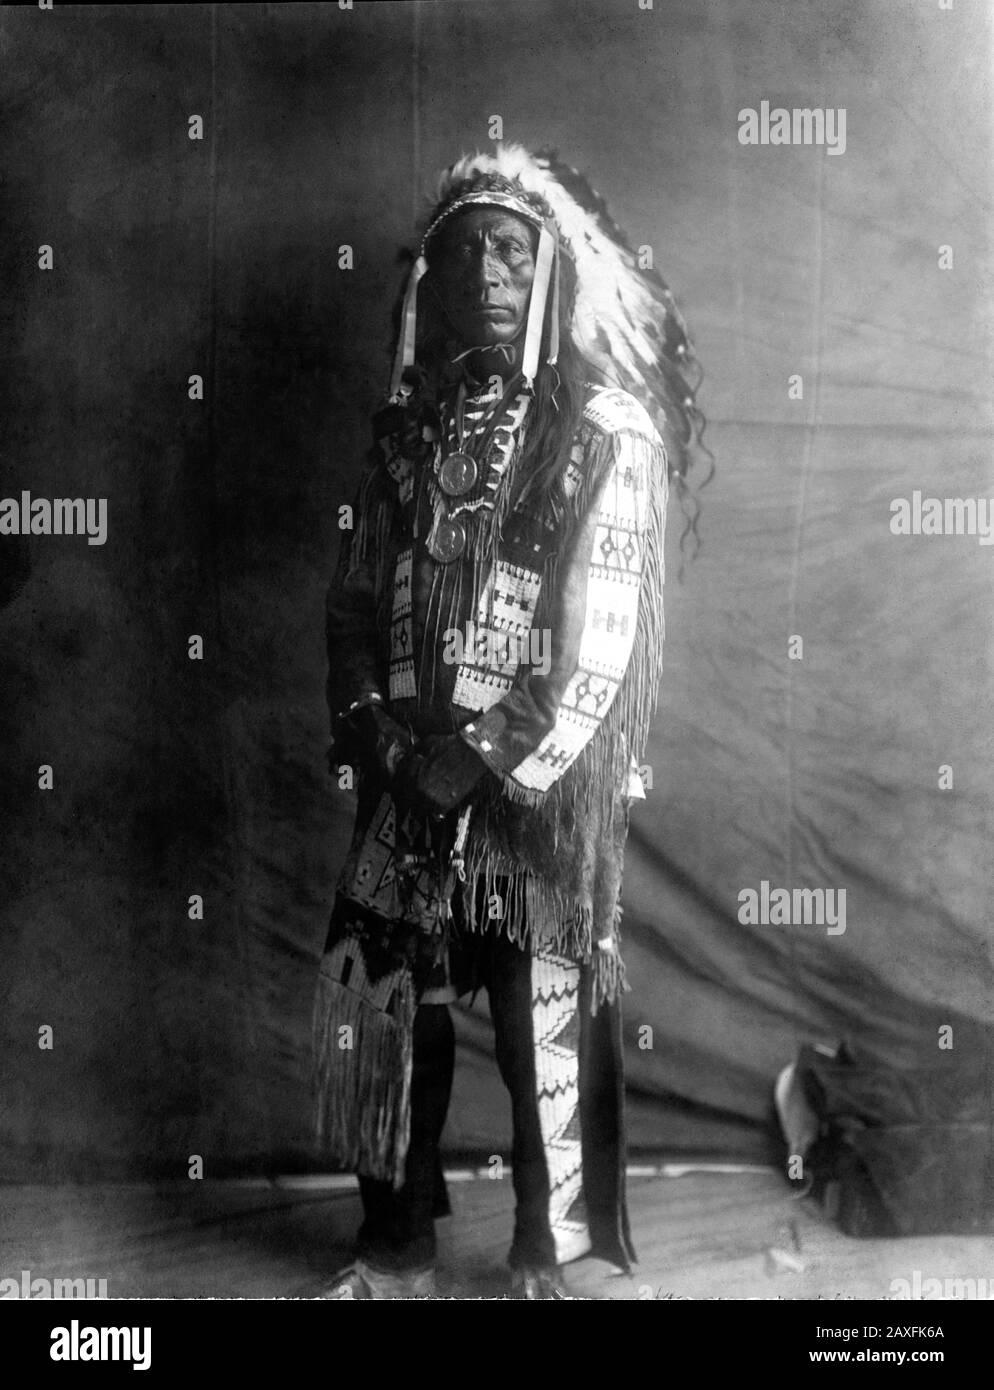 1907, USA :  Native American CHIEF  Jack Red Cloud of Oglala Lakota ( Sioux ) ( 1822 –  1909 ) . Photo by Edward S. CURTIS ( 1868 - 1952 ). - CAPO NUVOLA ROSSA - The North American Indian - HISTORY - foto storiche - warbonnet  - foto storica  -  Indians - INDIANI D' AMERICA - PELLEROSSA - natives americans  - Indians of North America - CAPO TRIBU' INDIANO - GUERRIERO - WARRIOR - portrait - ritratto  - SELVAGGIO WEST - piuma - piume - feathers  - STOCK - necklace - collana - fringes - frangia - frangie  © Archivio GBB / Stock Photo